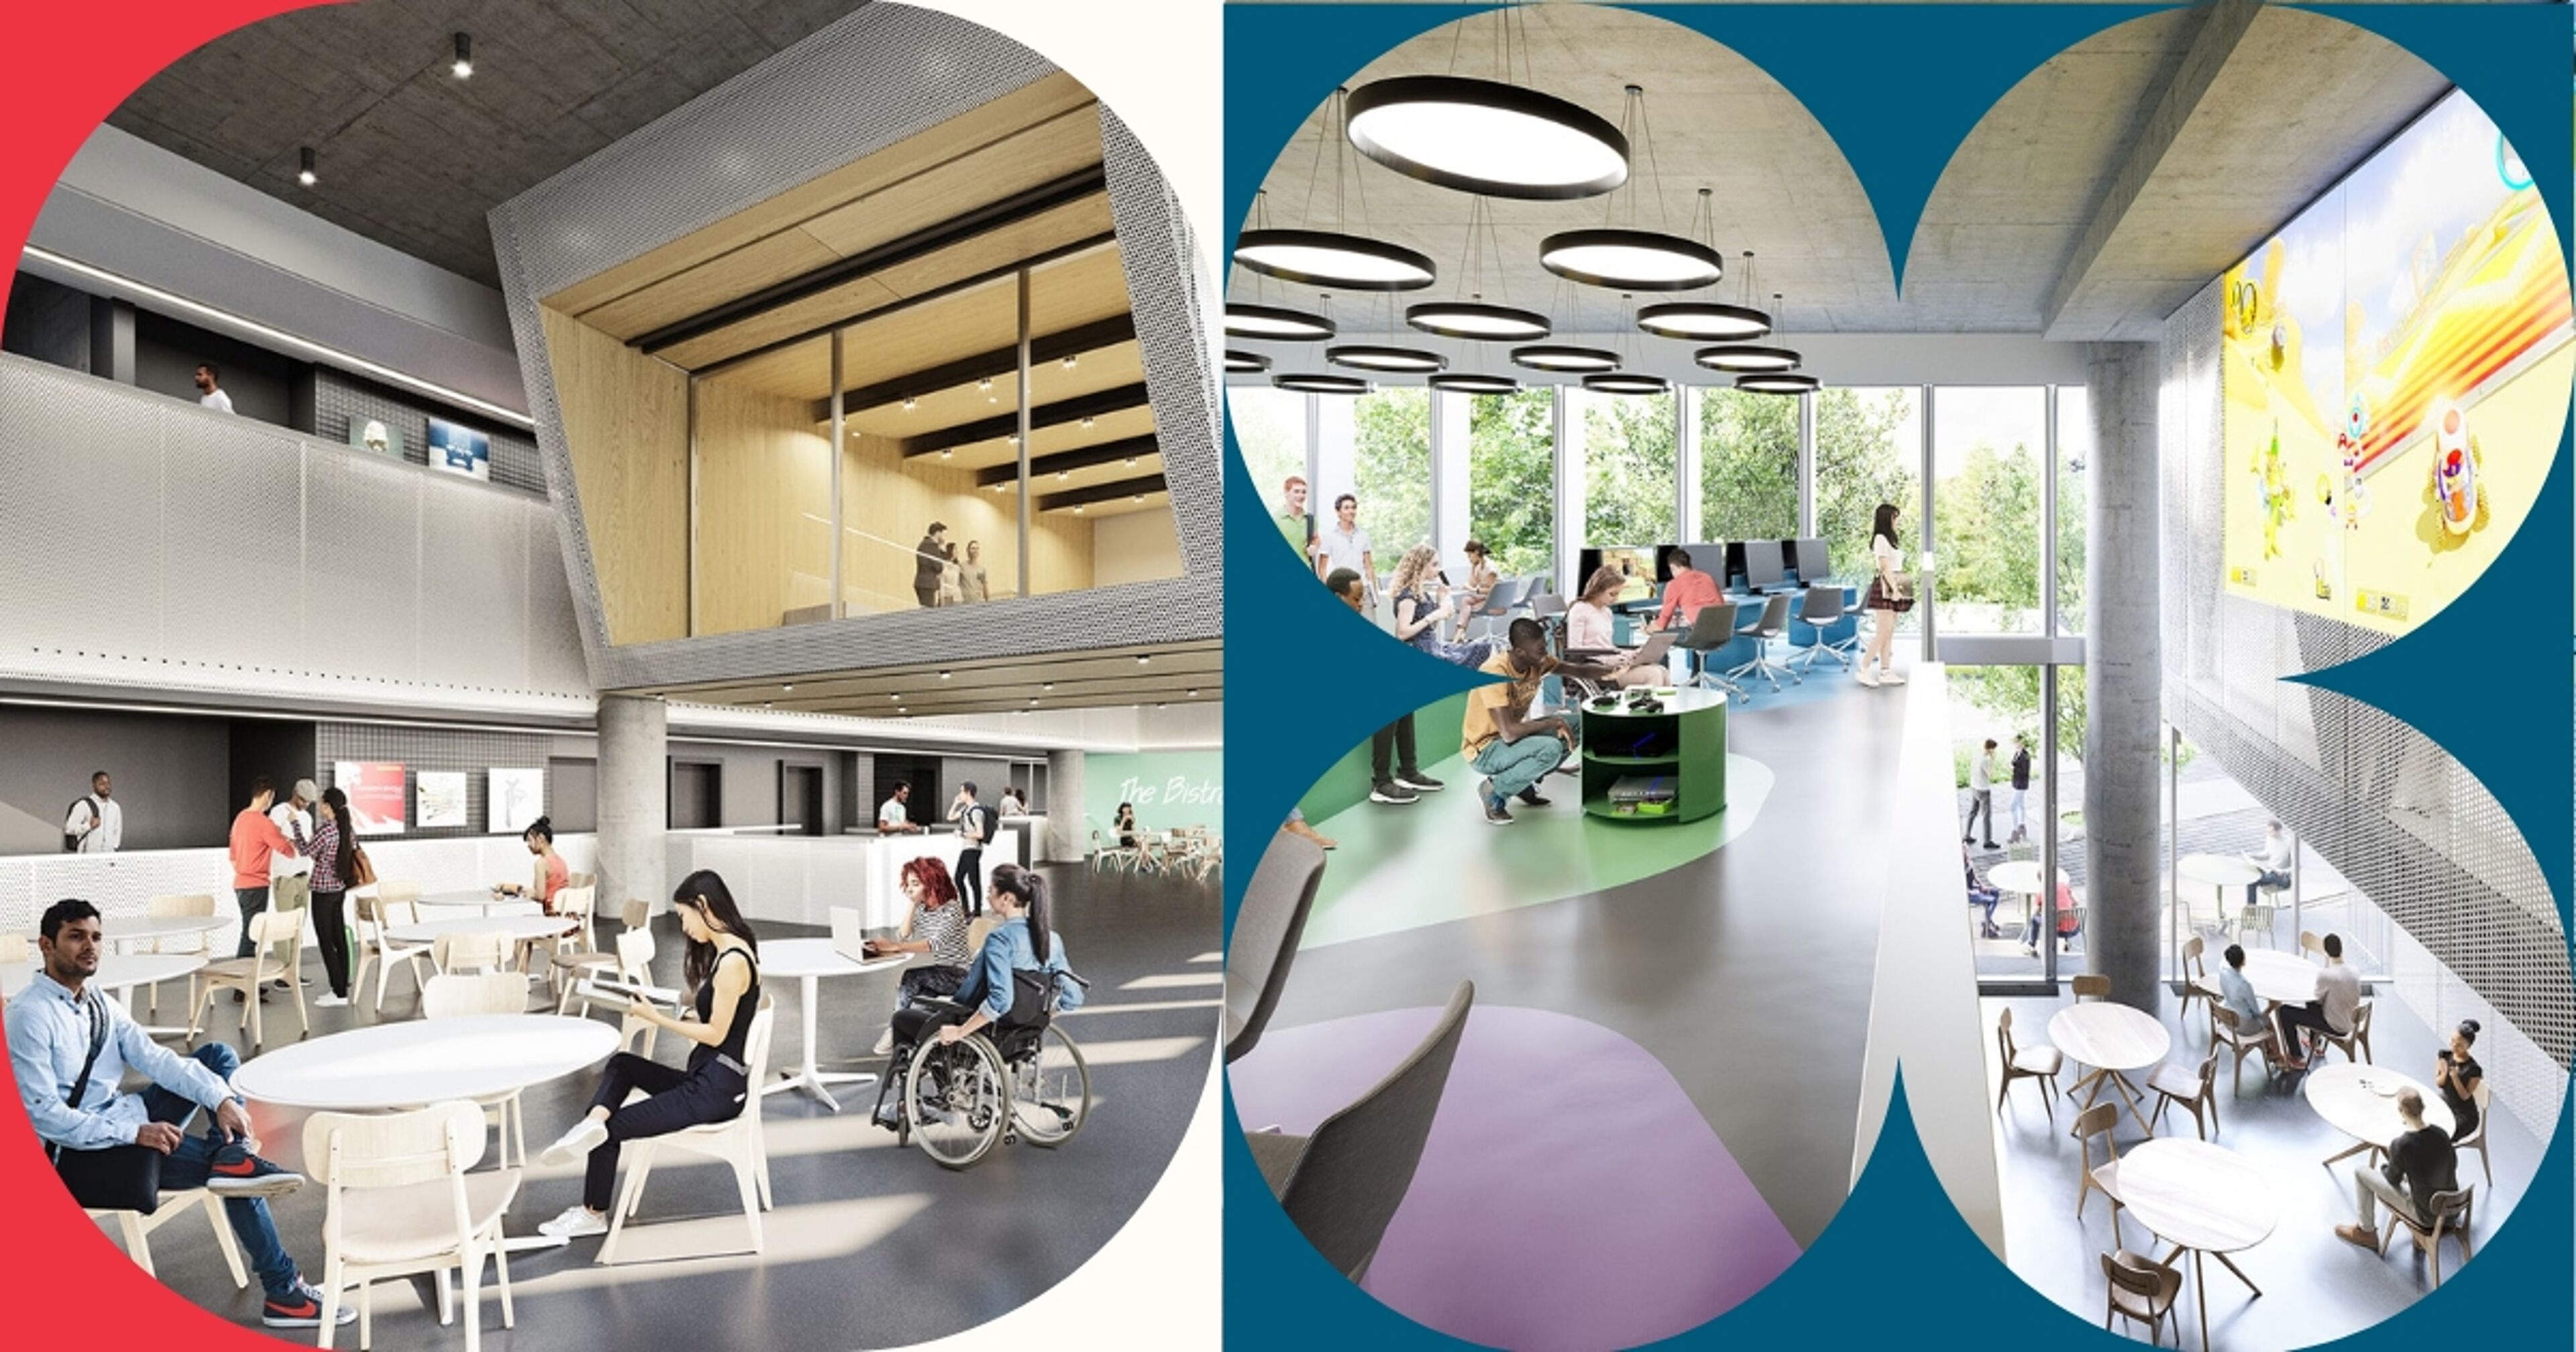 A split-view image contrasting traditional and contemporary educational spaces, highlighting accessibility and collaborative areas.